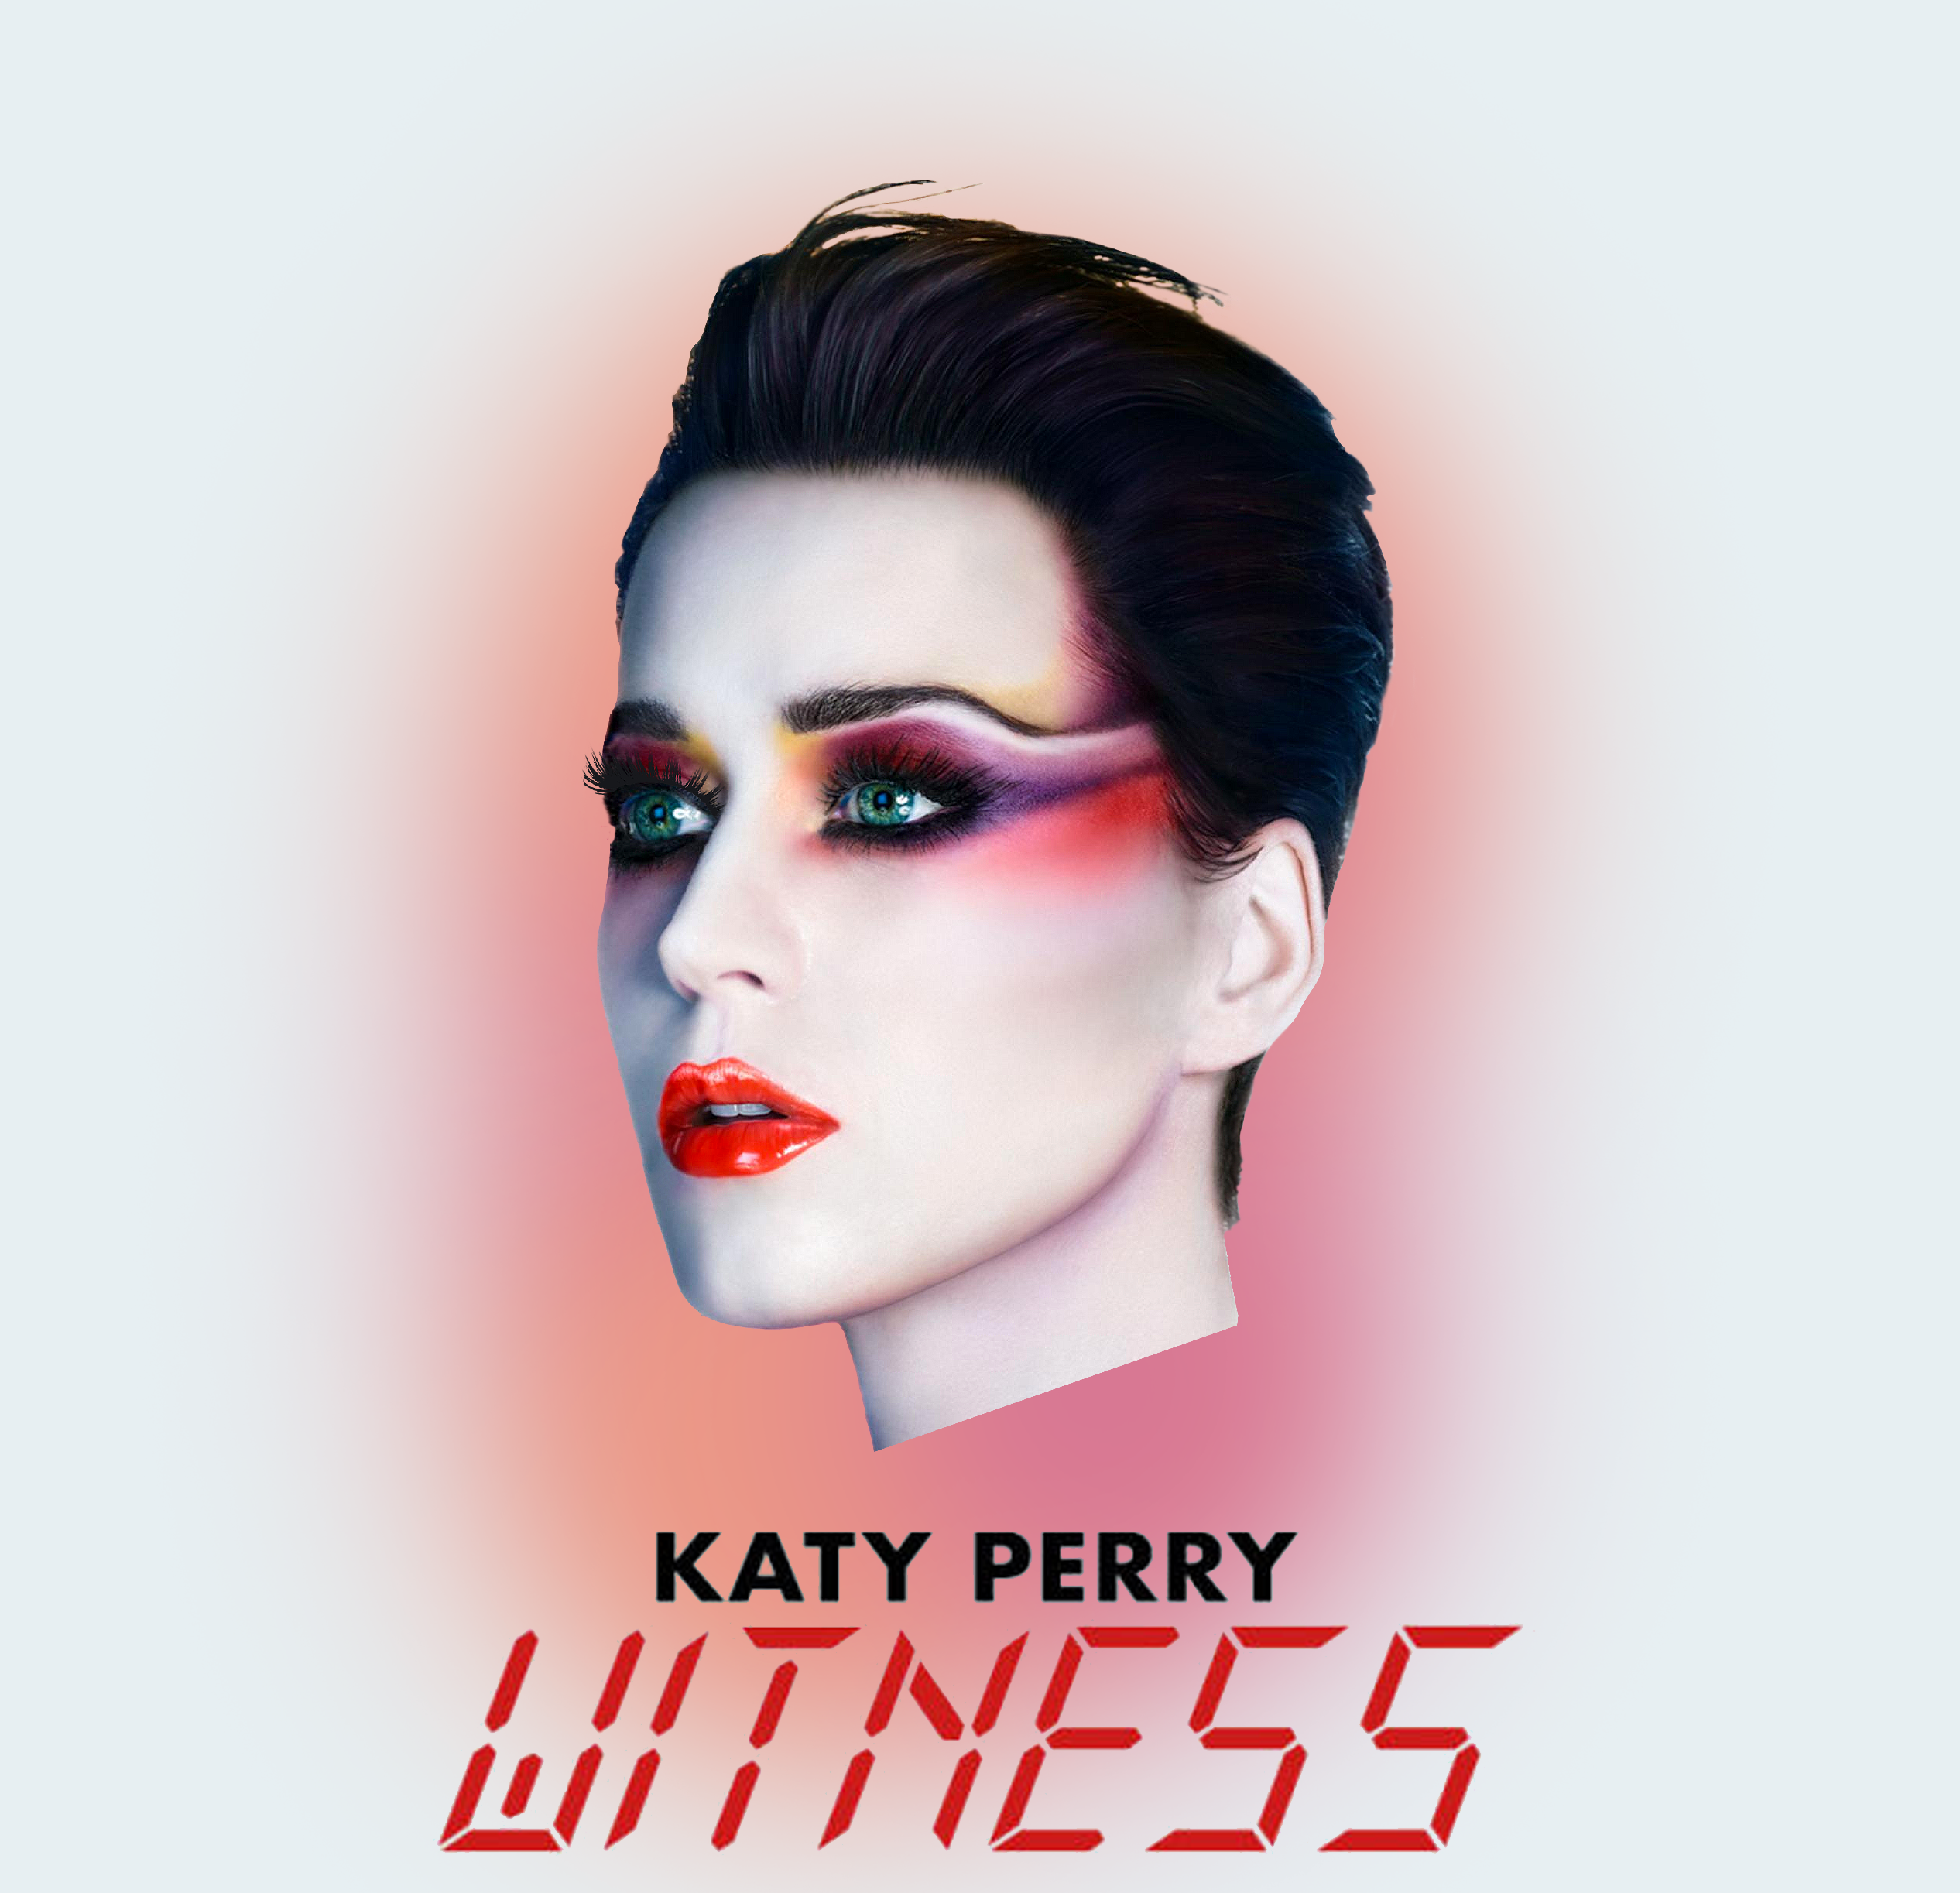 katy-perry-witness-cover-1497018481